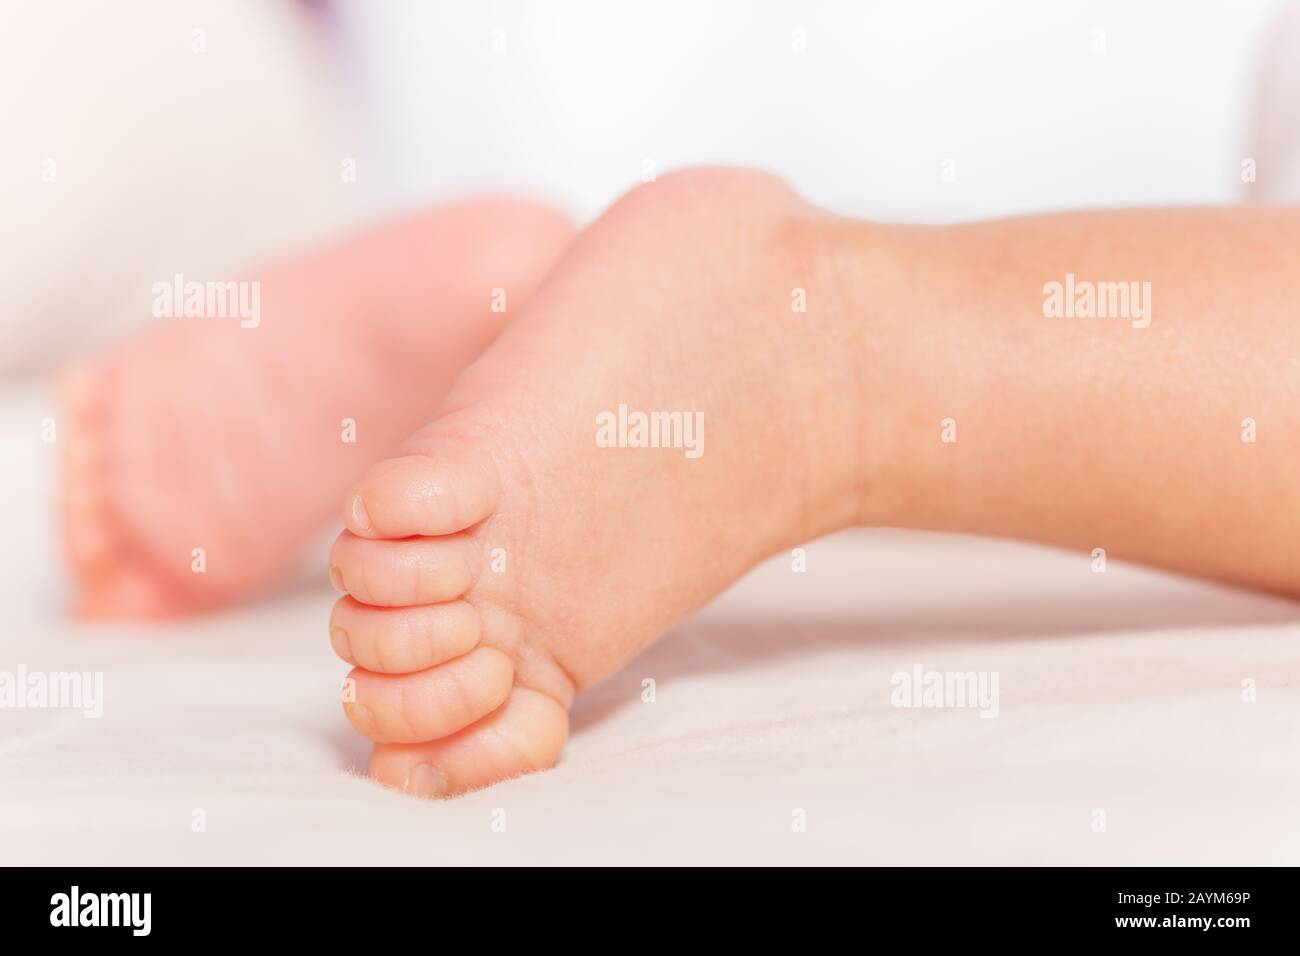 Feet close-up of newborn infant baby boy laying on the bed sheet Stock Photo